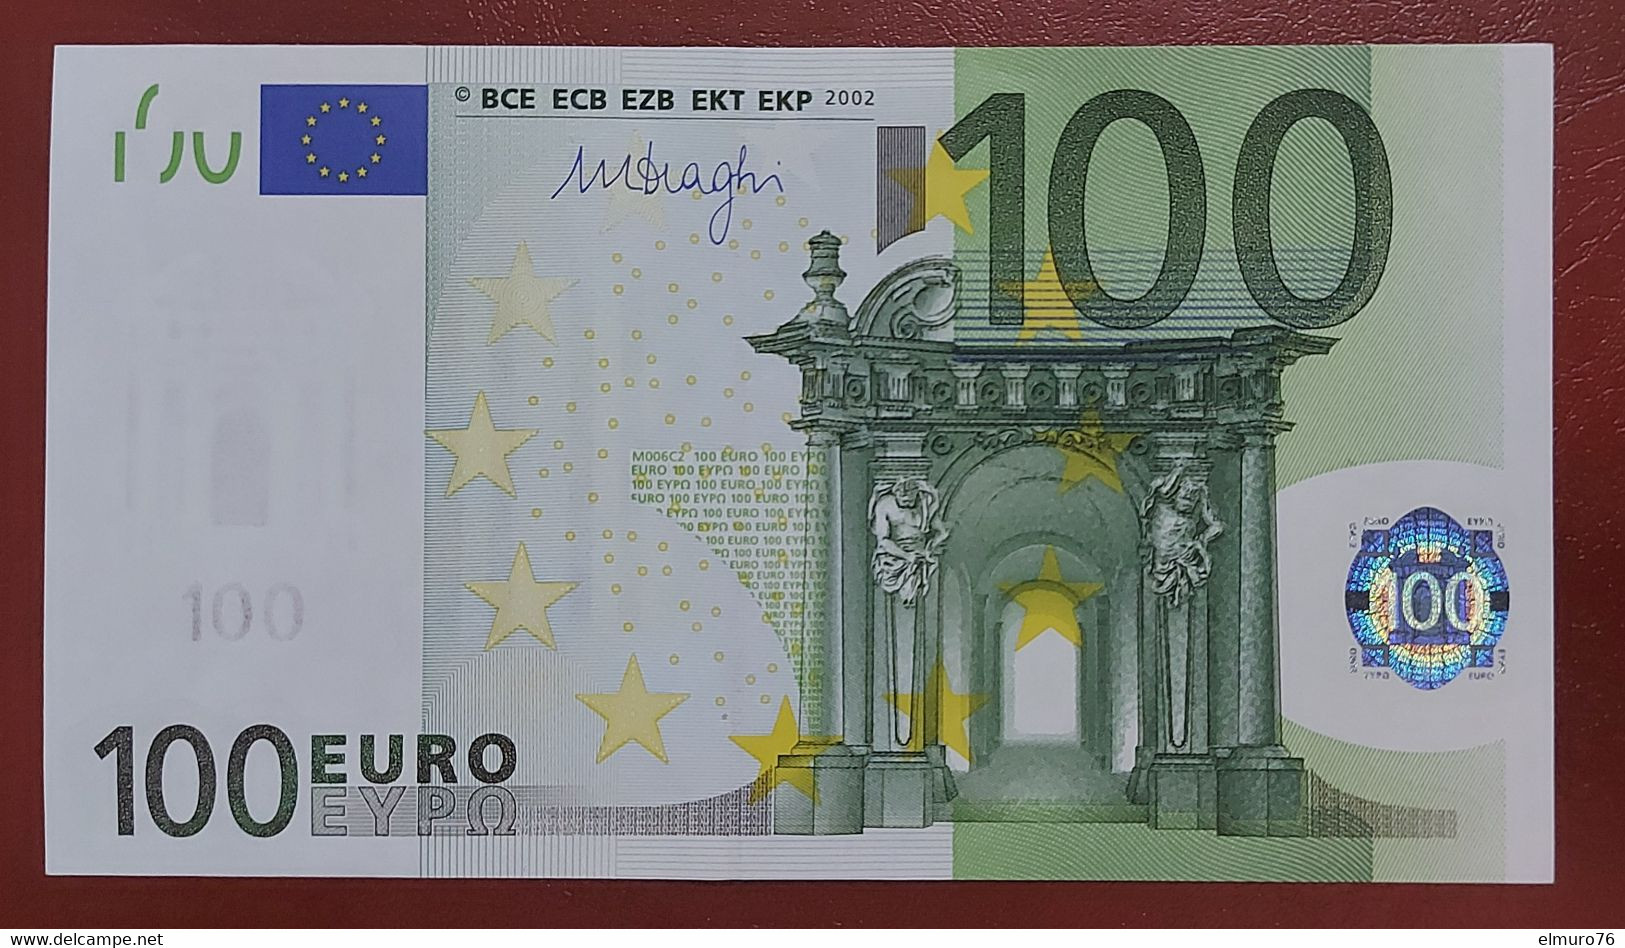 100 EURO M006C2 Spain Draghi Serie V About UNC - 100 Euro